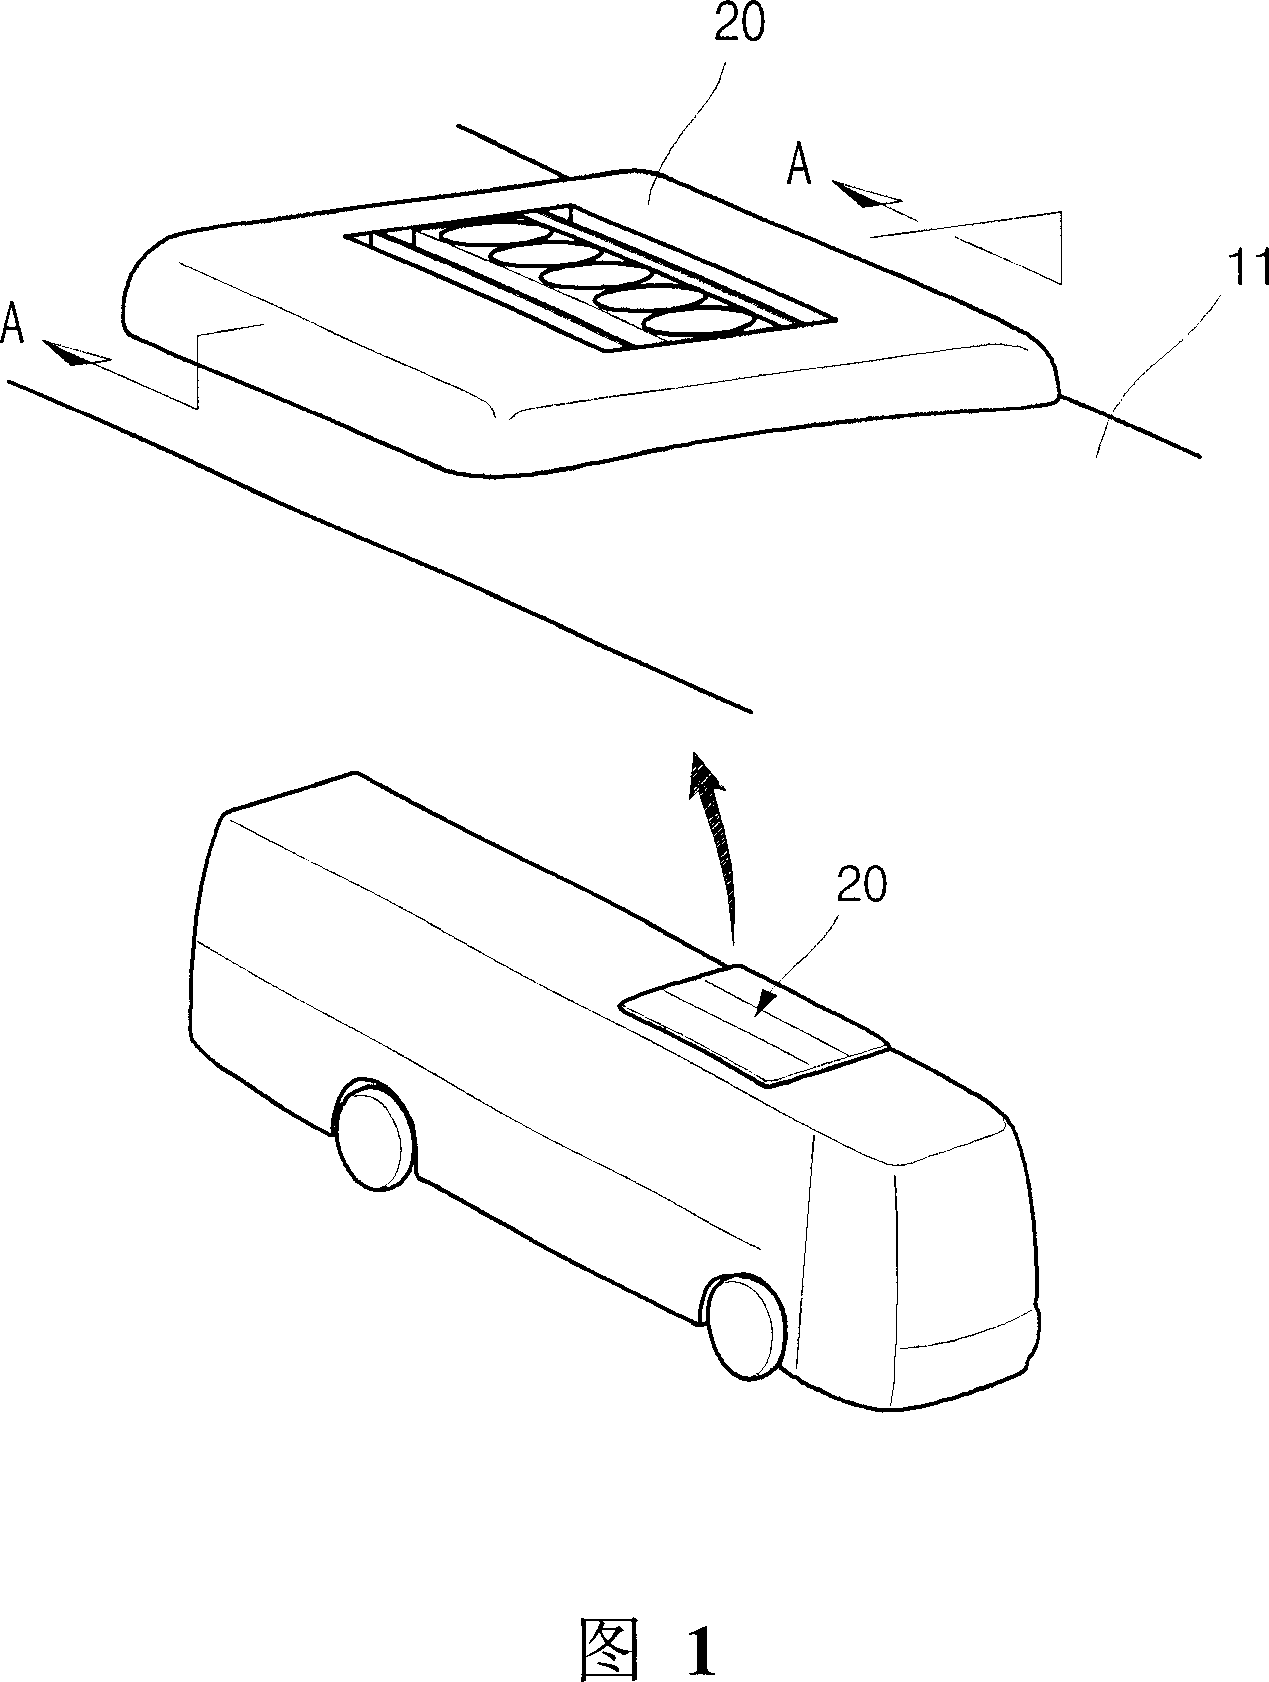 A fabricating structure of a roof-type airconditioner for a vehicle being unified condenser and evaporater